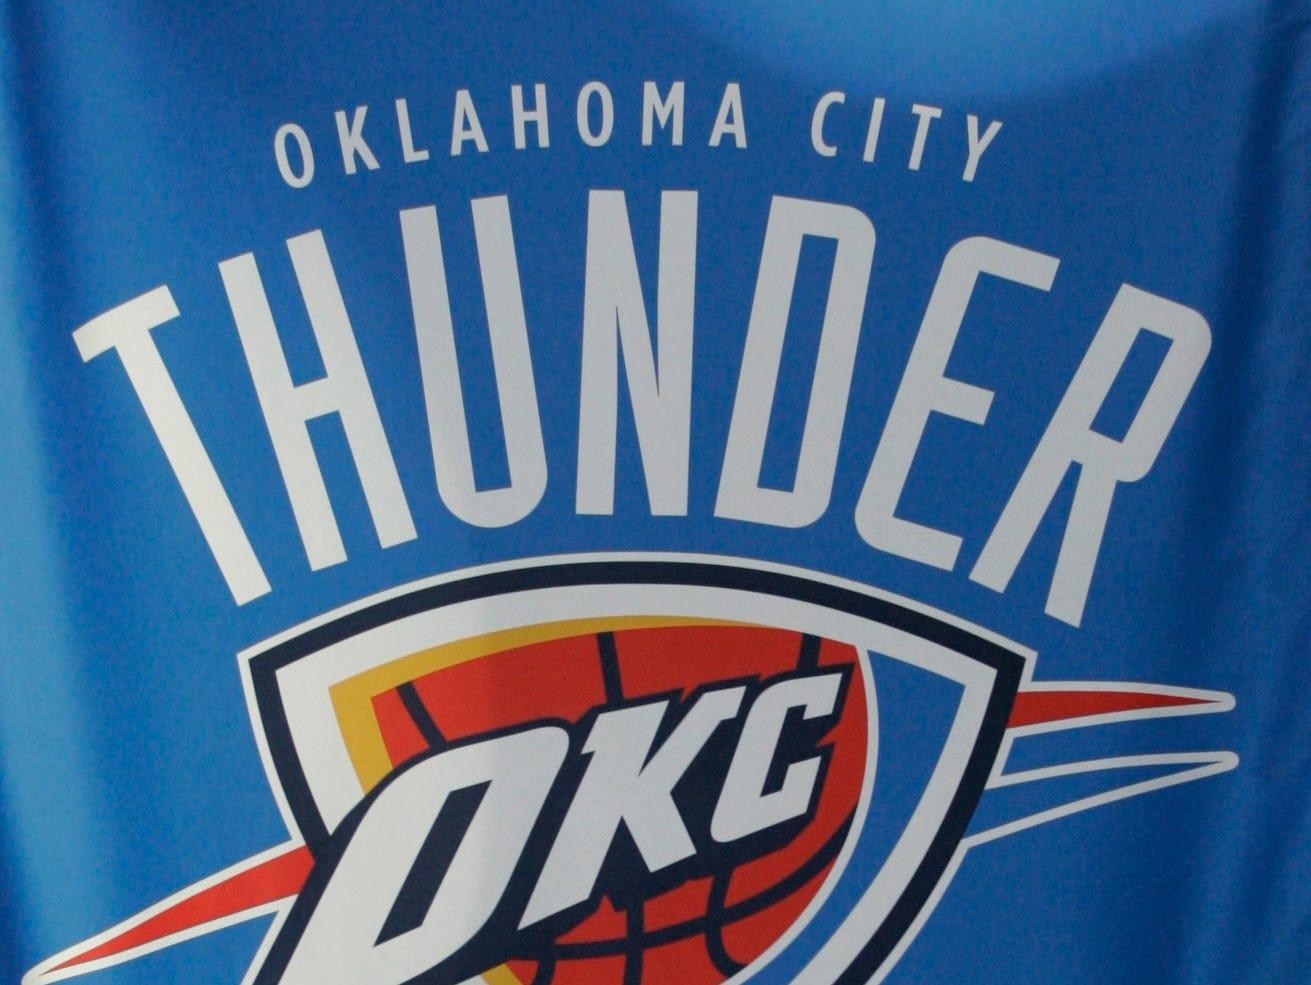 Thunder Team Plane Players Share Image Of S Dented Nose